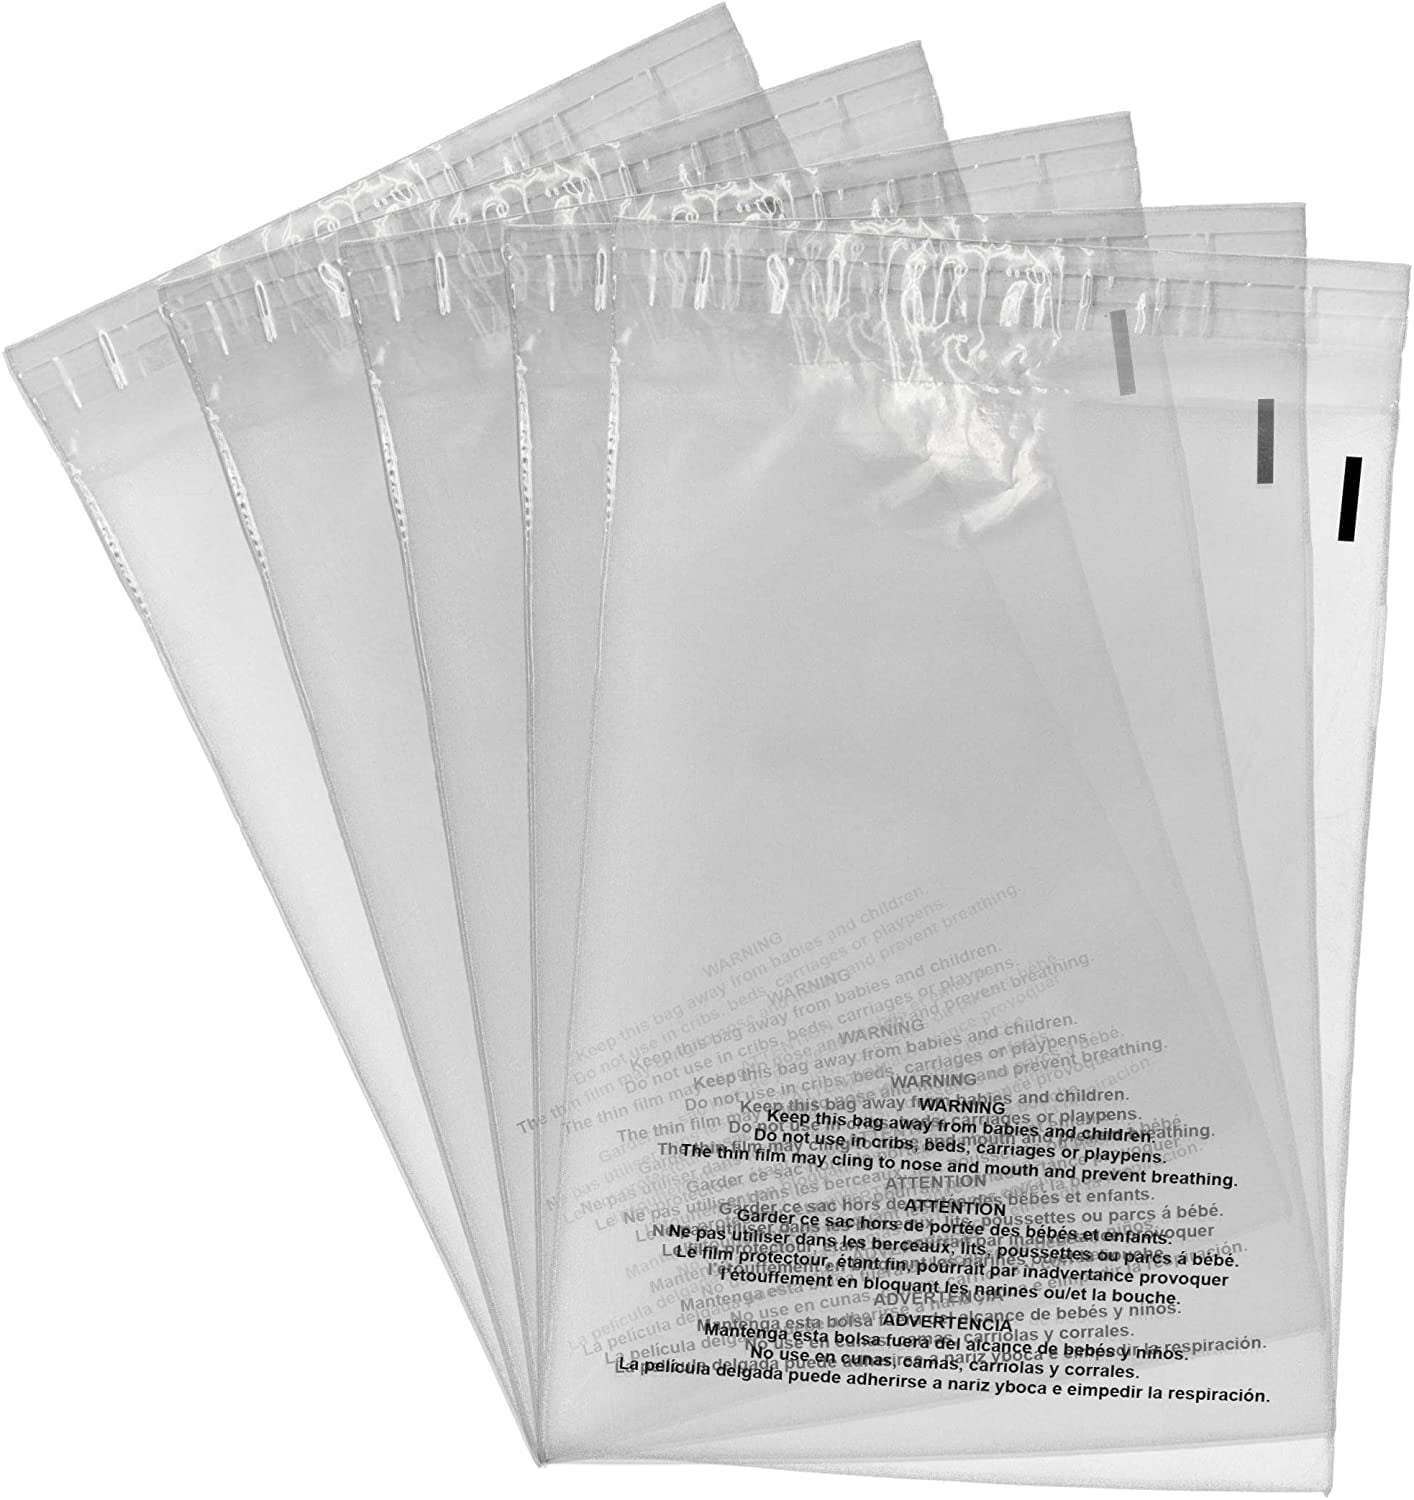 Child Suffocation Warning Clear/Transparent Bags 24" x 36" 609 x 915mm 